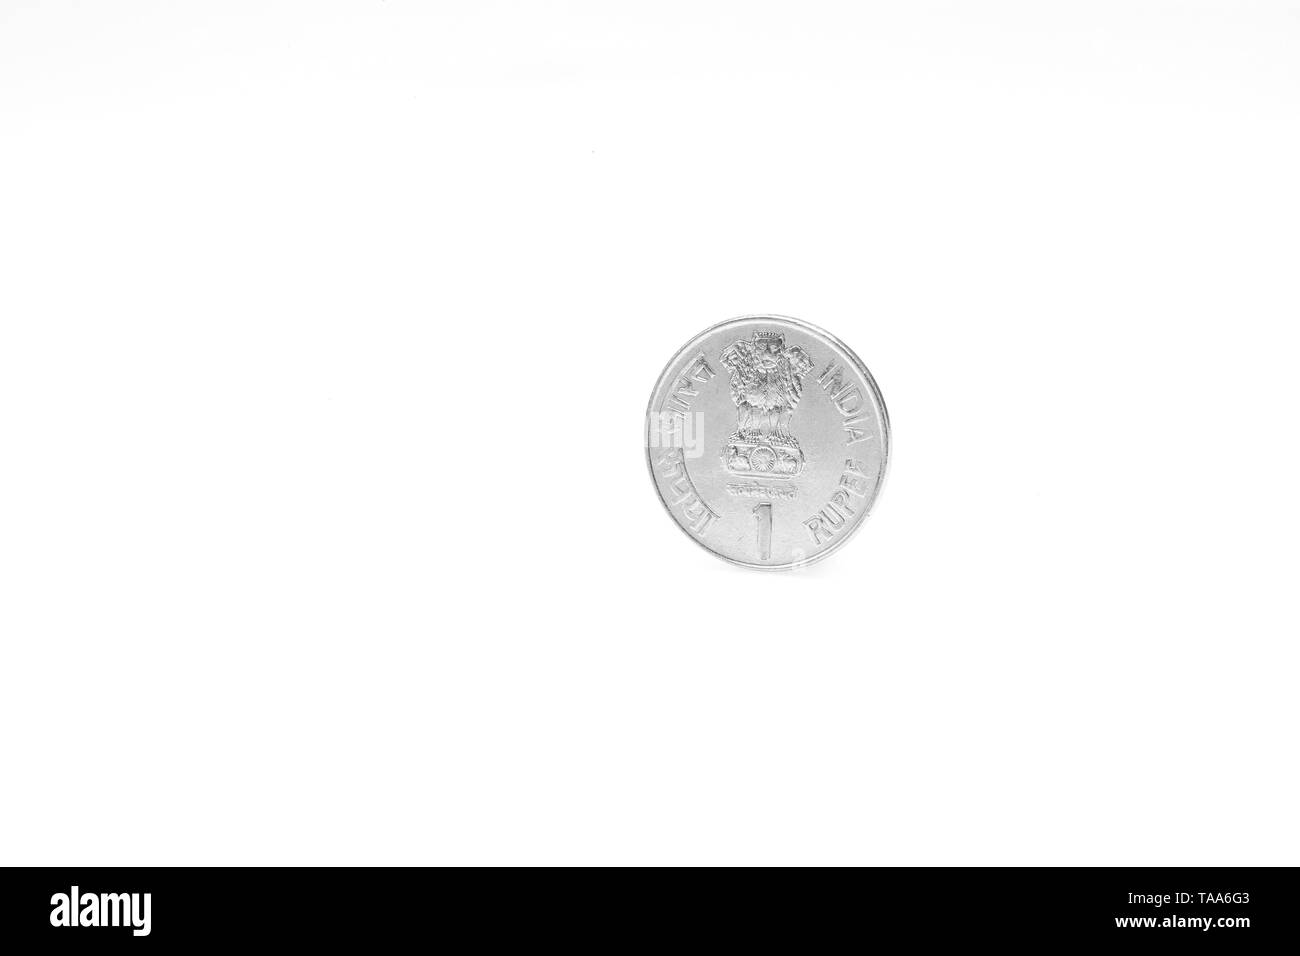 one rupee coin on white background, India, Asia, 1999 Stock Photo